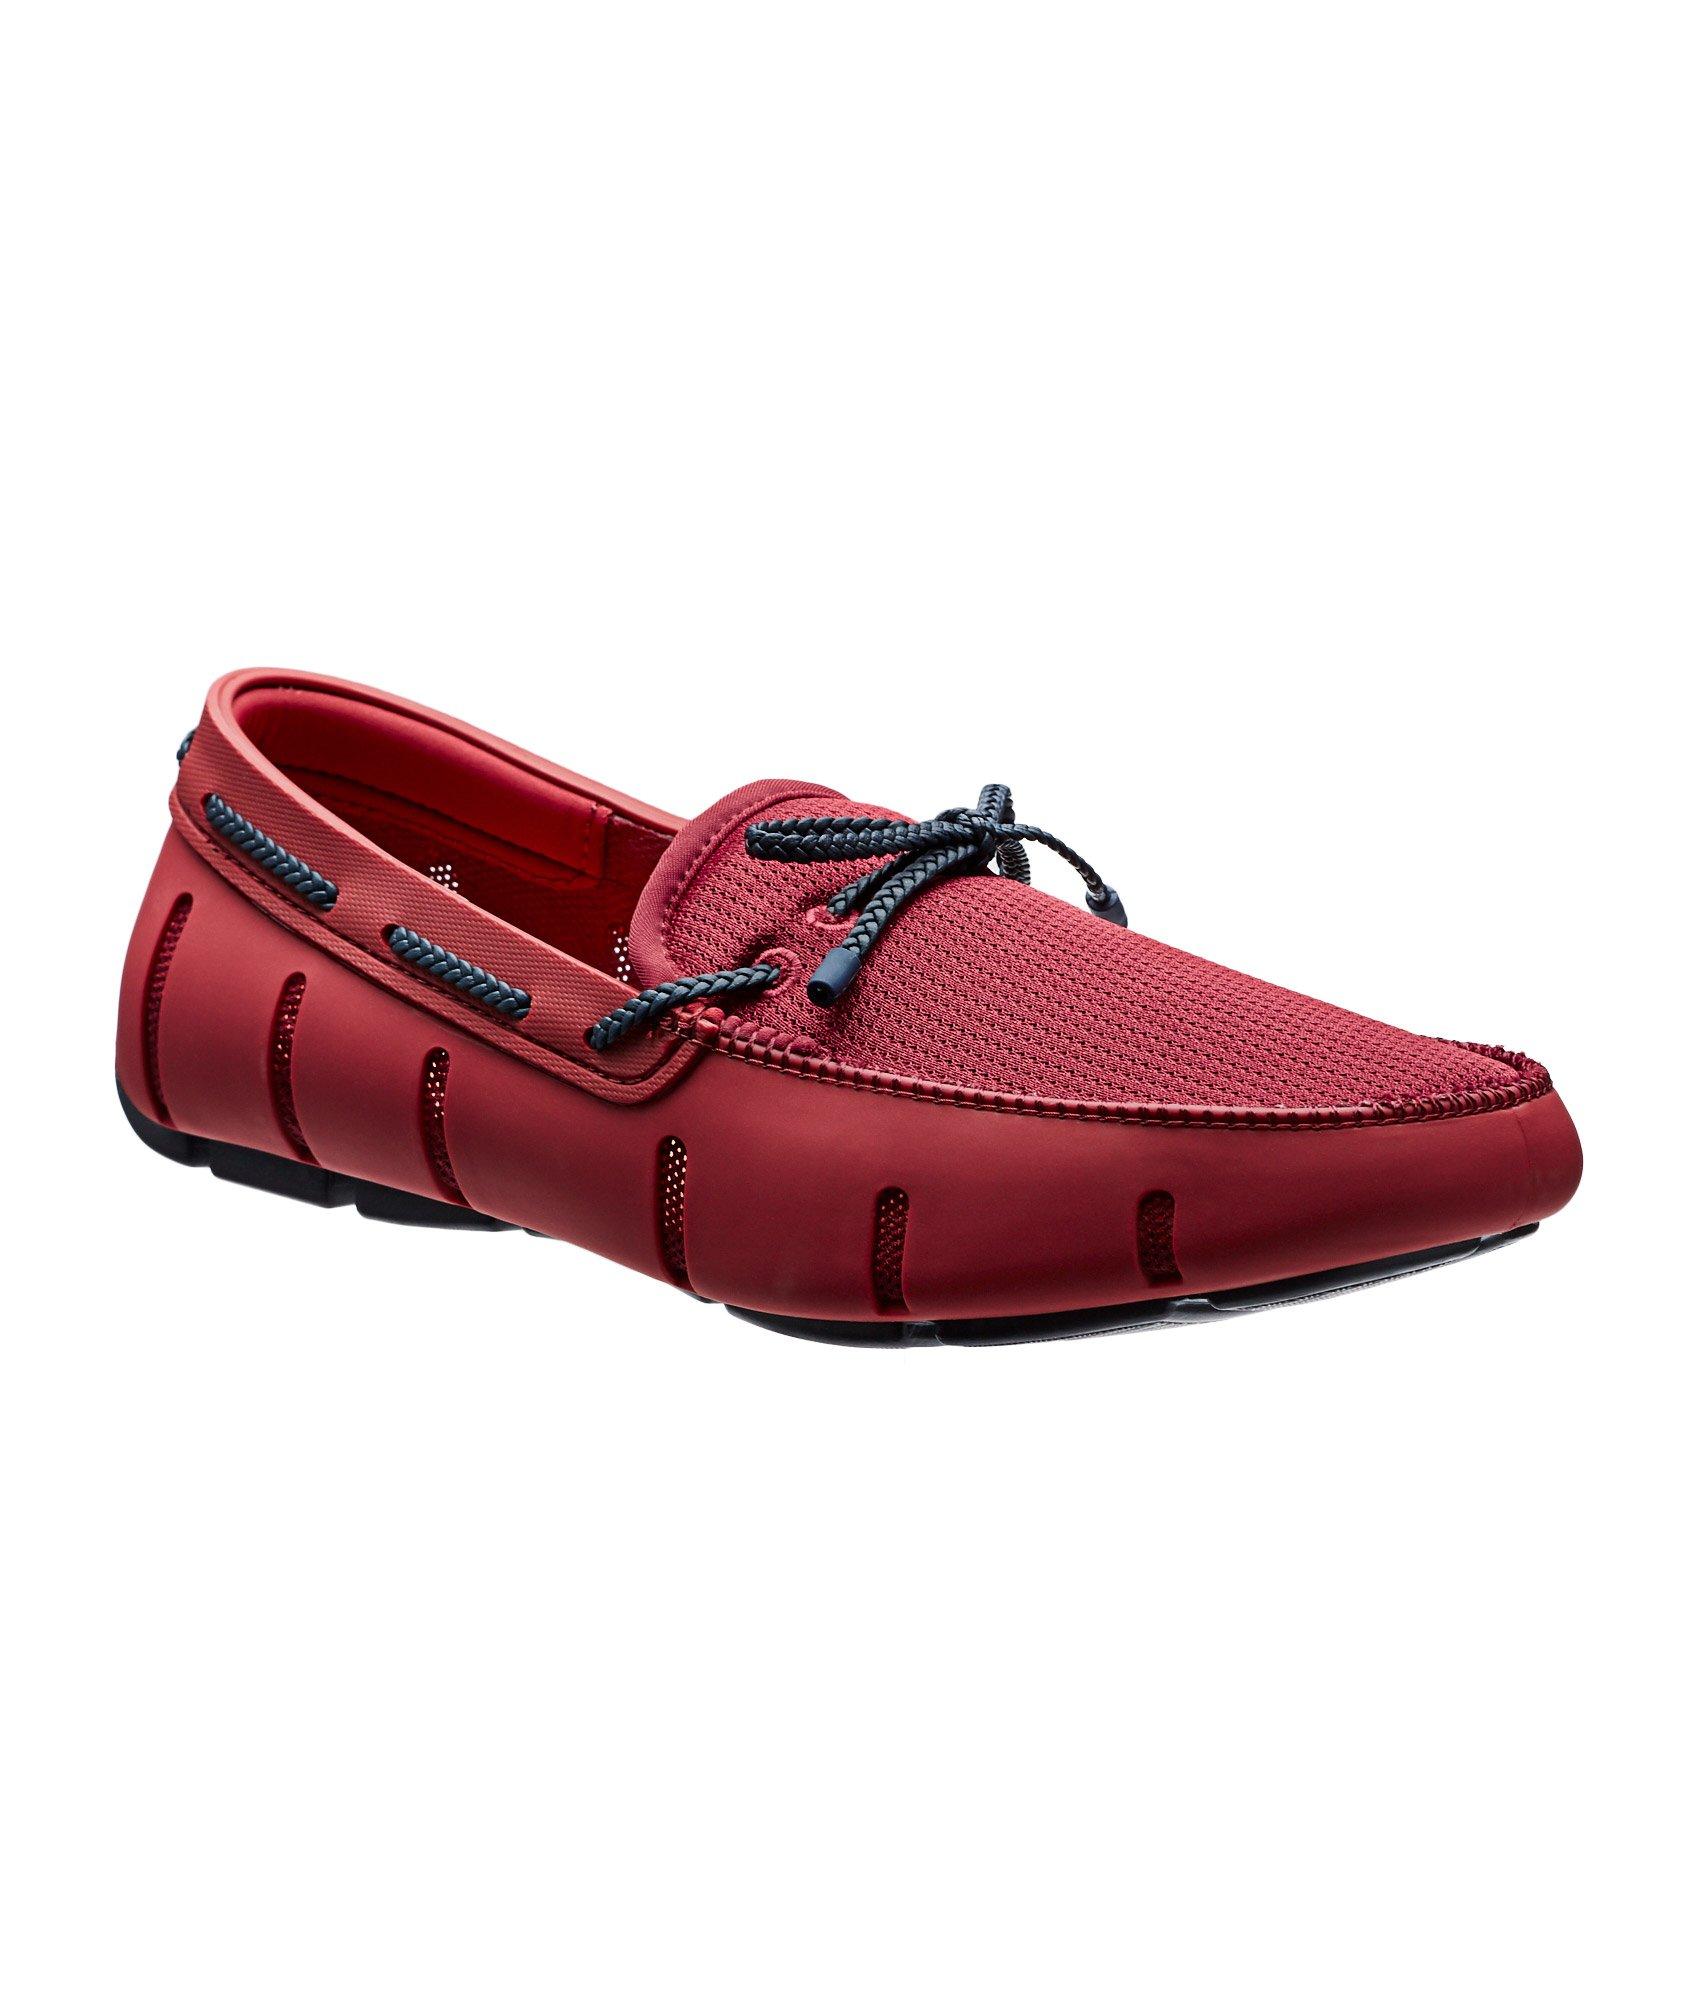 Braided Lace-Up Loafers image 0